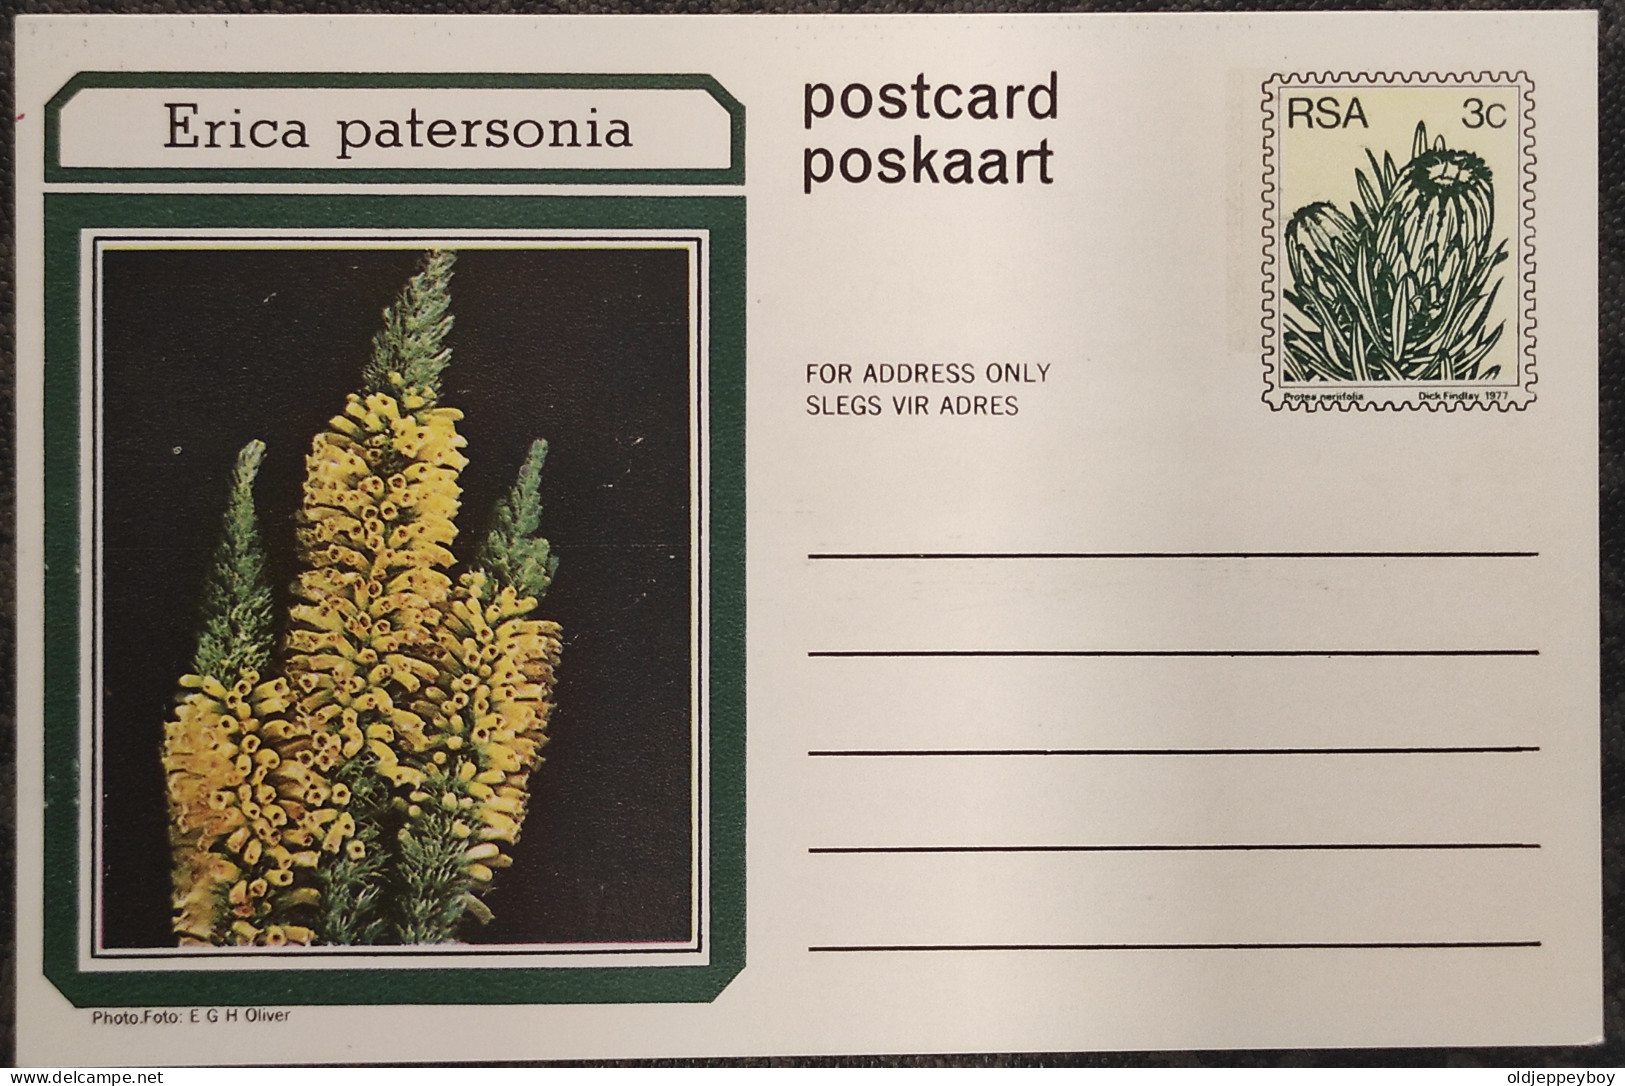 3c SOUTH AFRICA Postal STATIONERY CARD Illus ERICA PATERSONIA FLOWER Cover Stamps Flowers Rsa - Briefe U. Dokumente